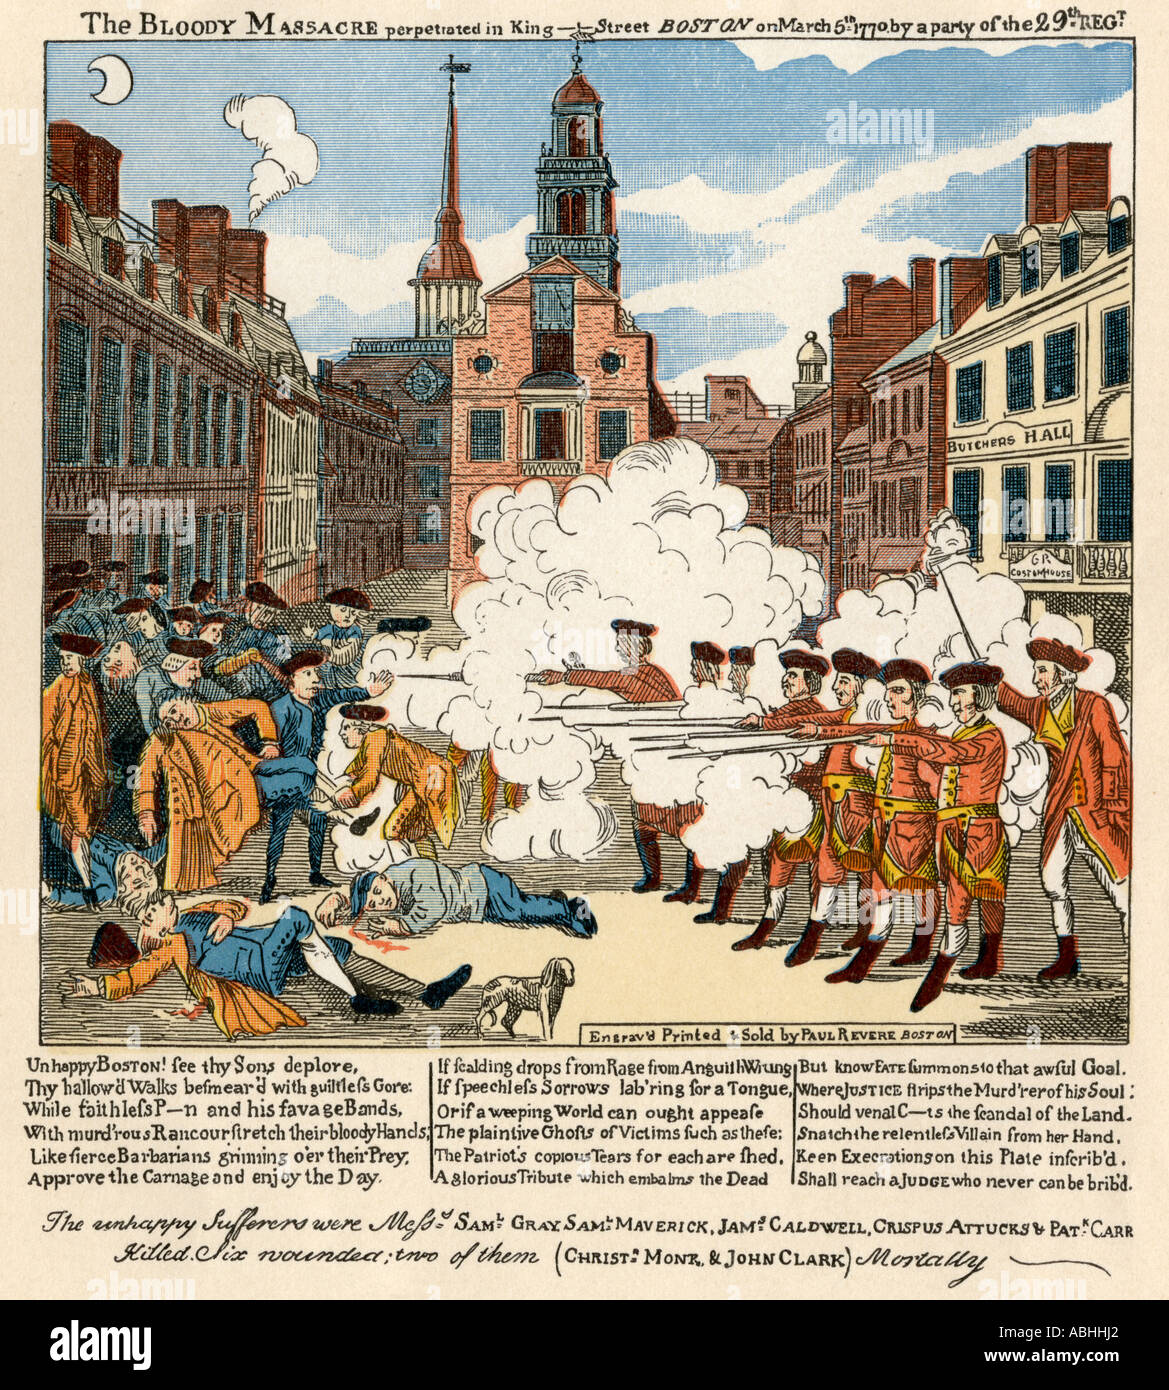 Paul Revere engraving of the Boston Massacre 1770 an event leading to